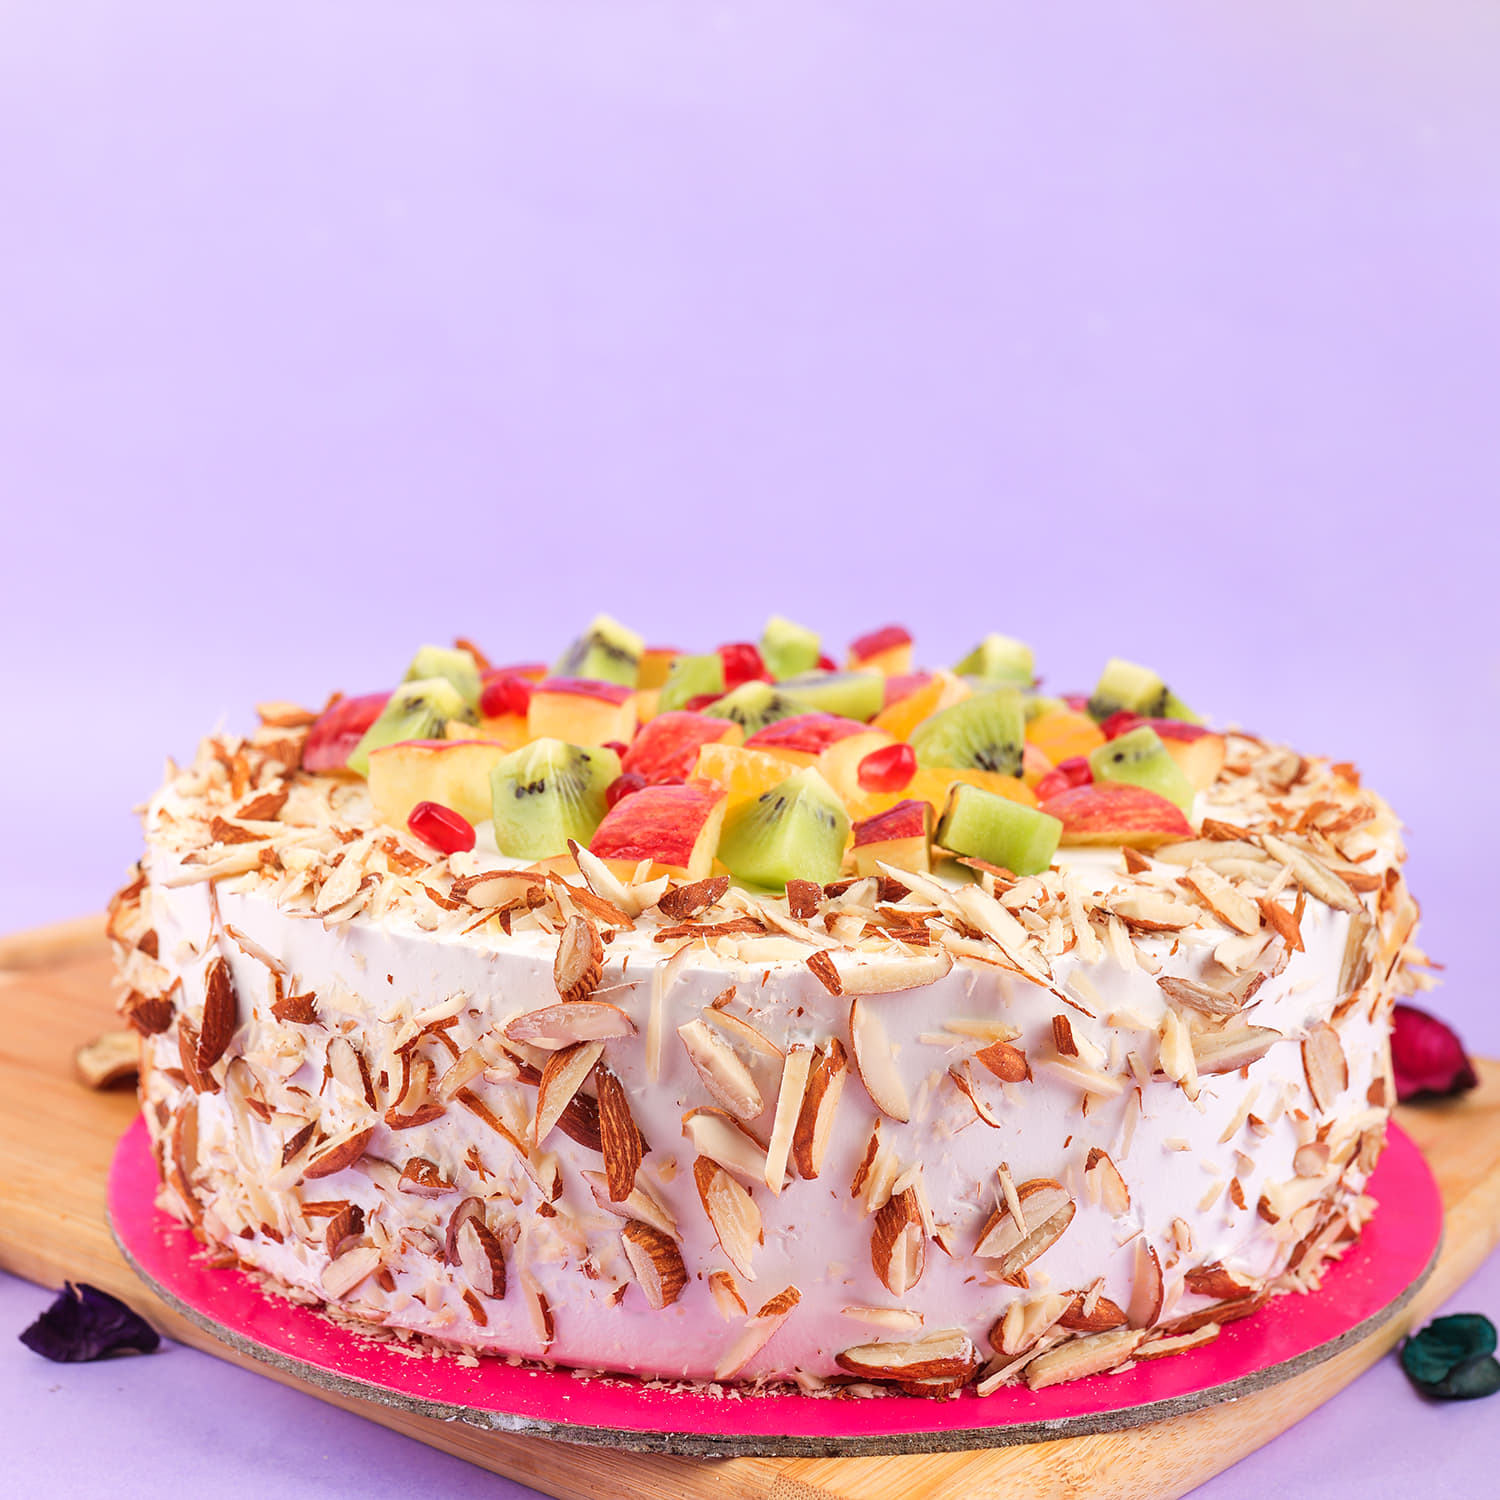 Buy The Baker's Dozen Carrot Walnut Cake - 100% Wholewheat Online at Best  Price of Rs 295 - bigbasket